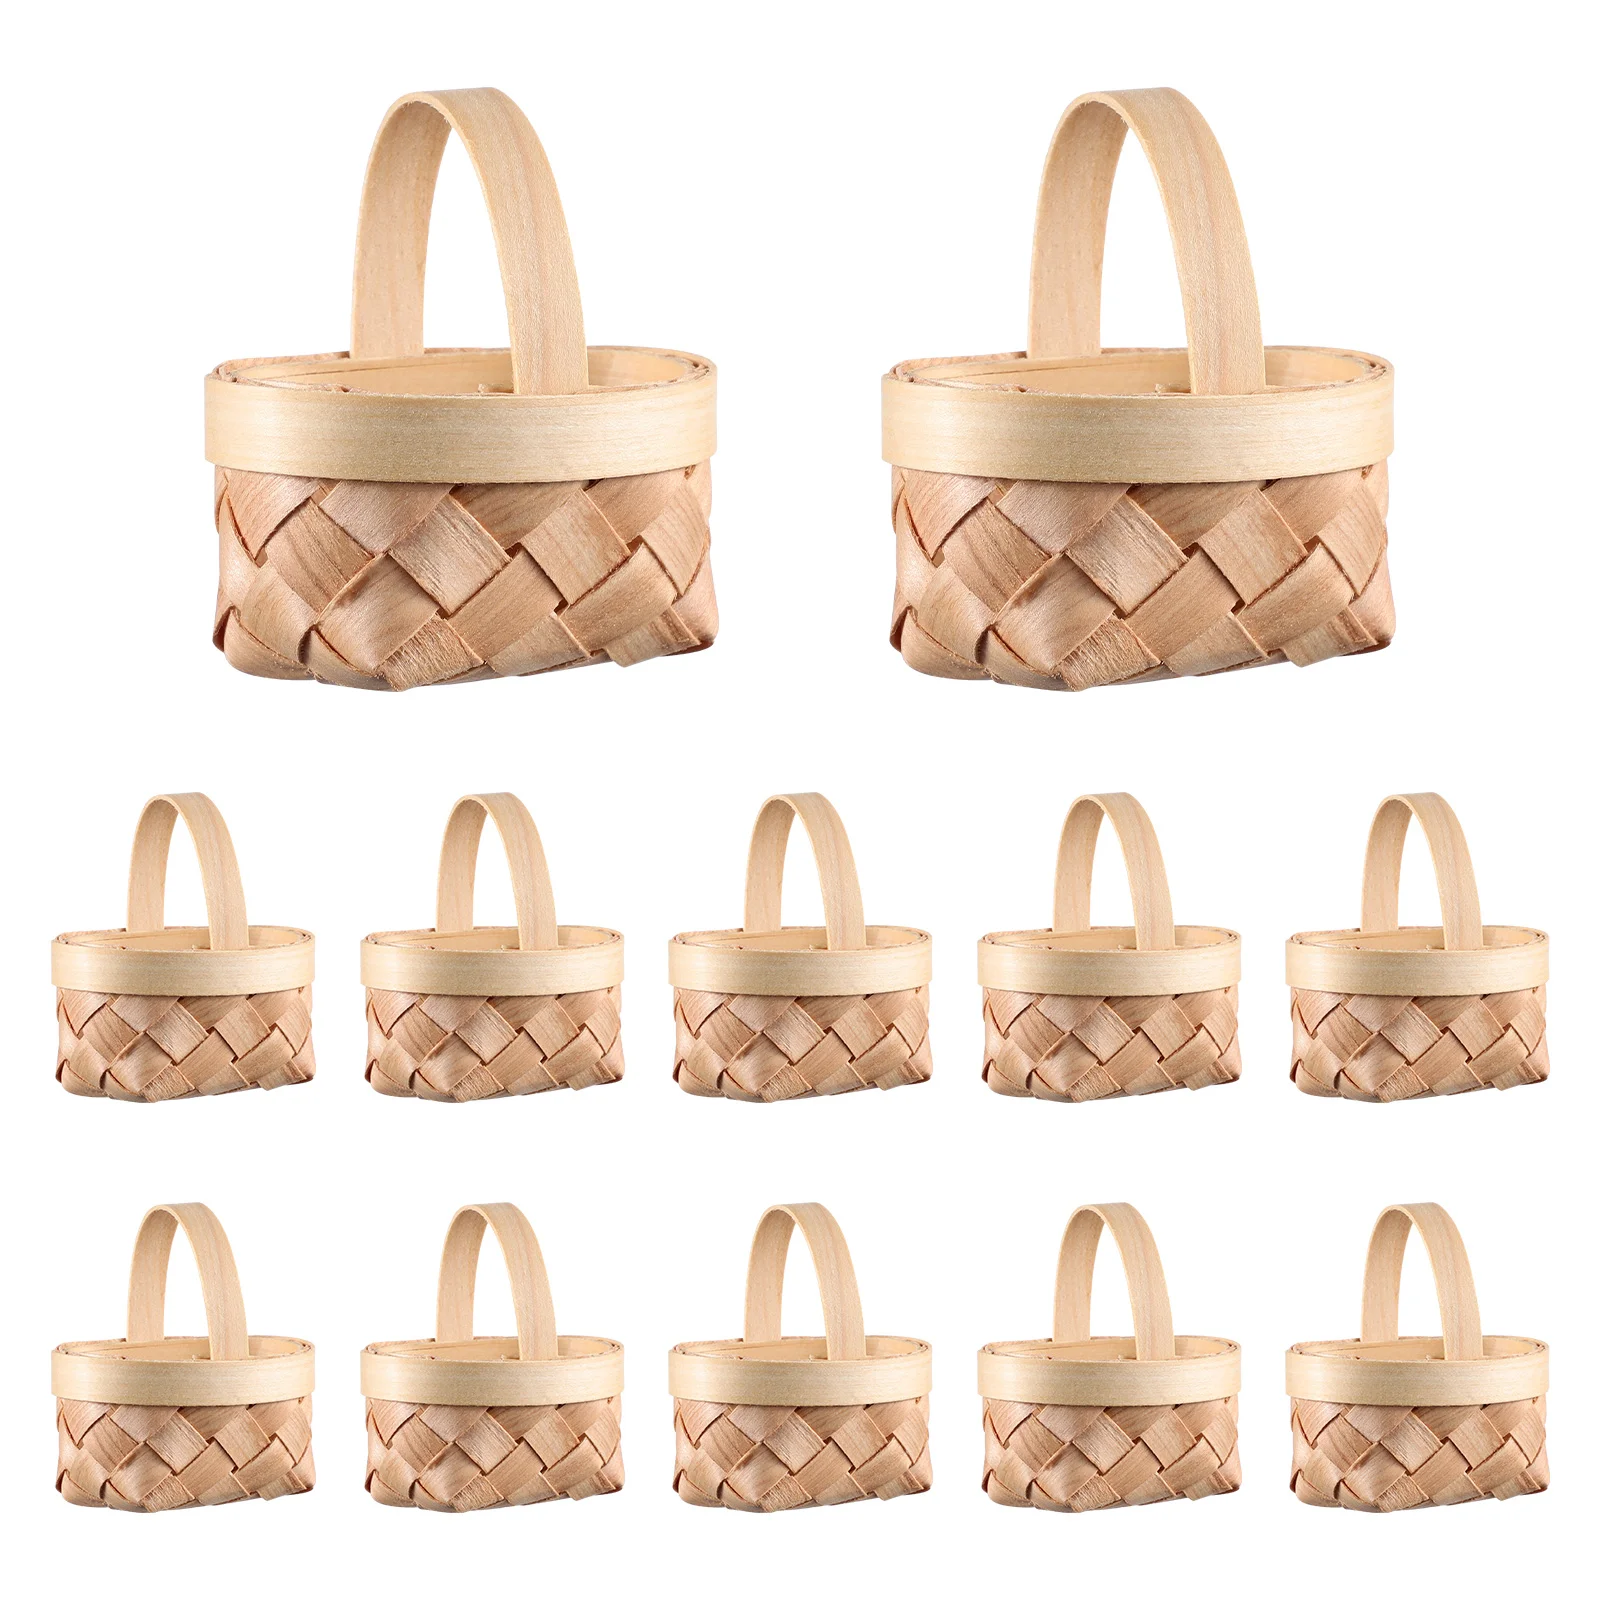 

Bulk Mechanical Pencils Woven Basket Mini Tote Baskets Wooden Decorate Candy Miniature Portable Small Decorative Baby Gift